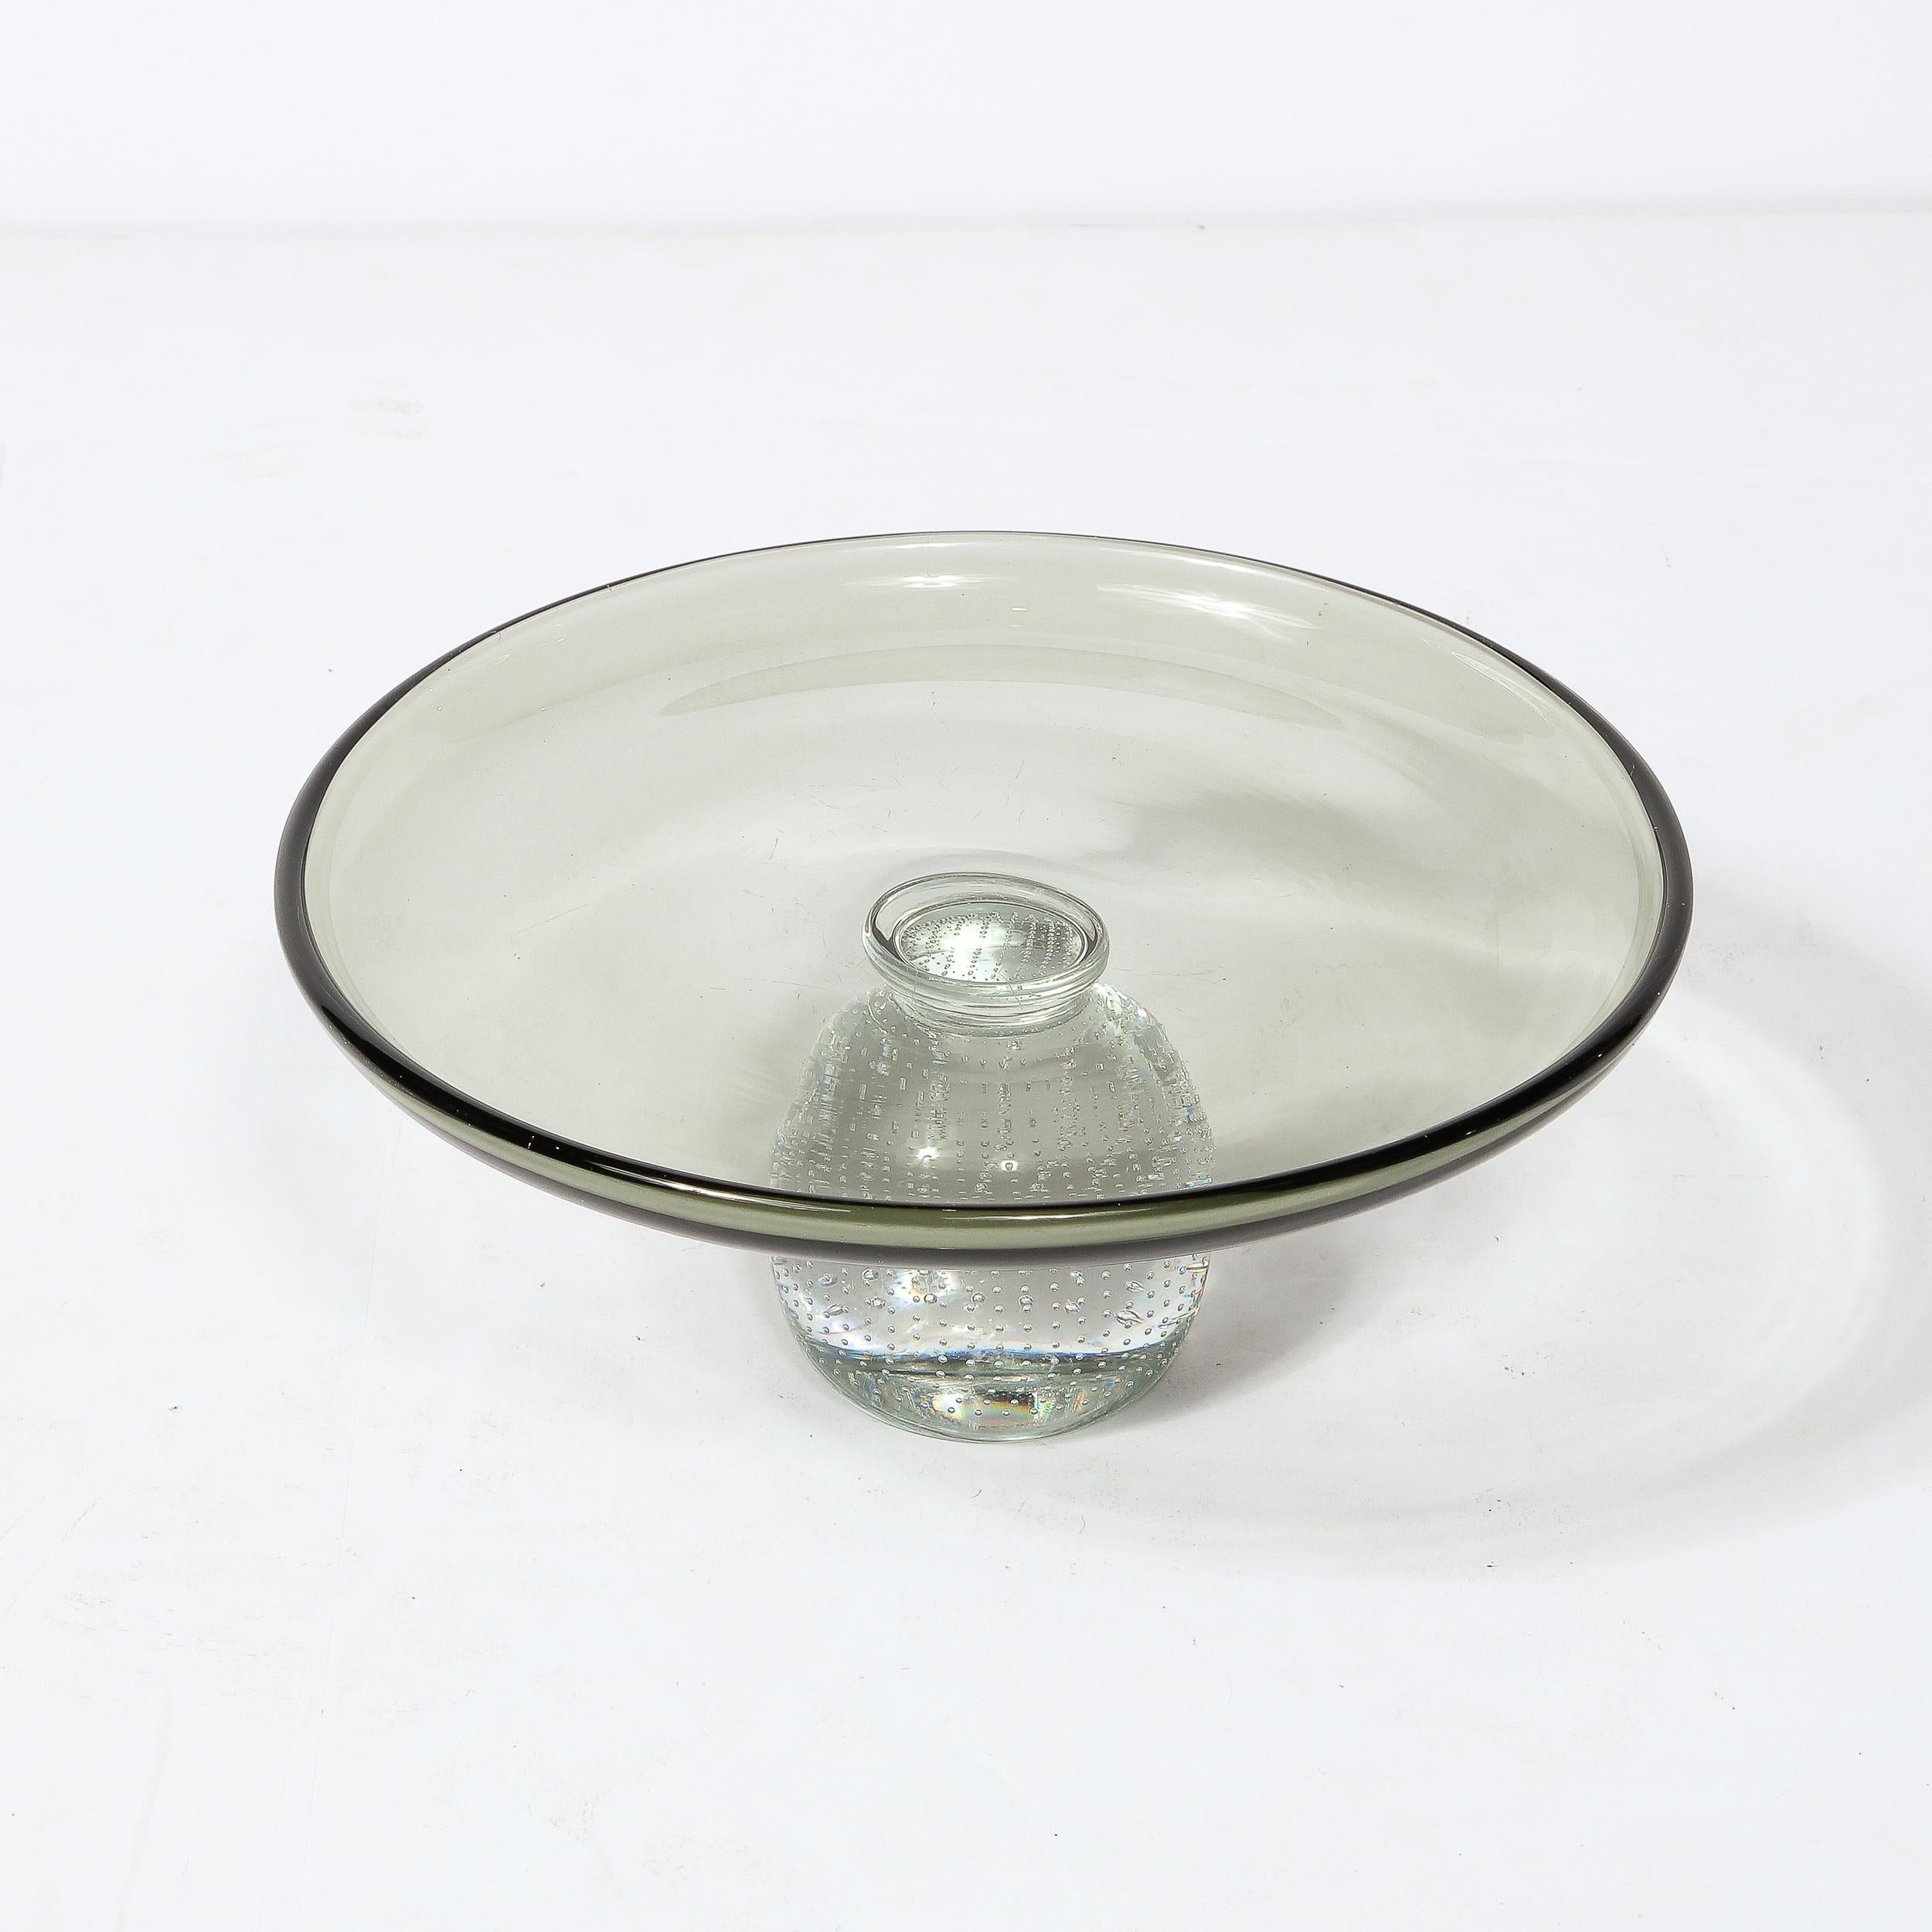 This Hand-Blown Glass Centerpiece/ tazza  originates from the United States Circa 1950. Composed in smoked semi-translucent glass with a raised lip supported by a base detailed in numerous stunning and evenly spaced murines. The glass is excellent